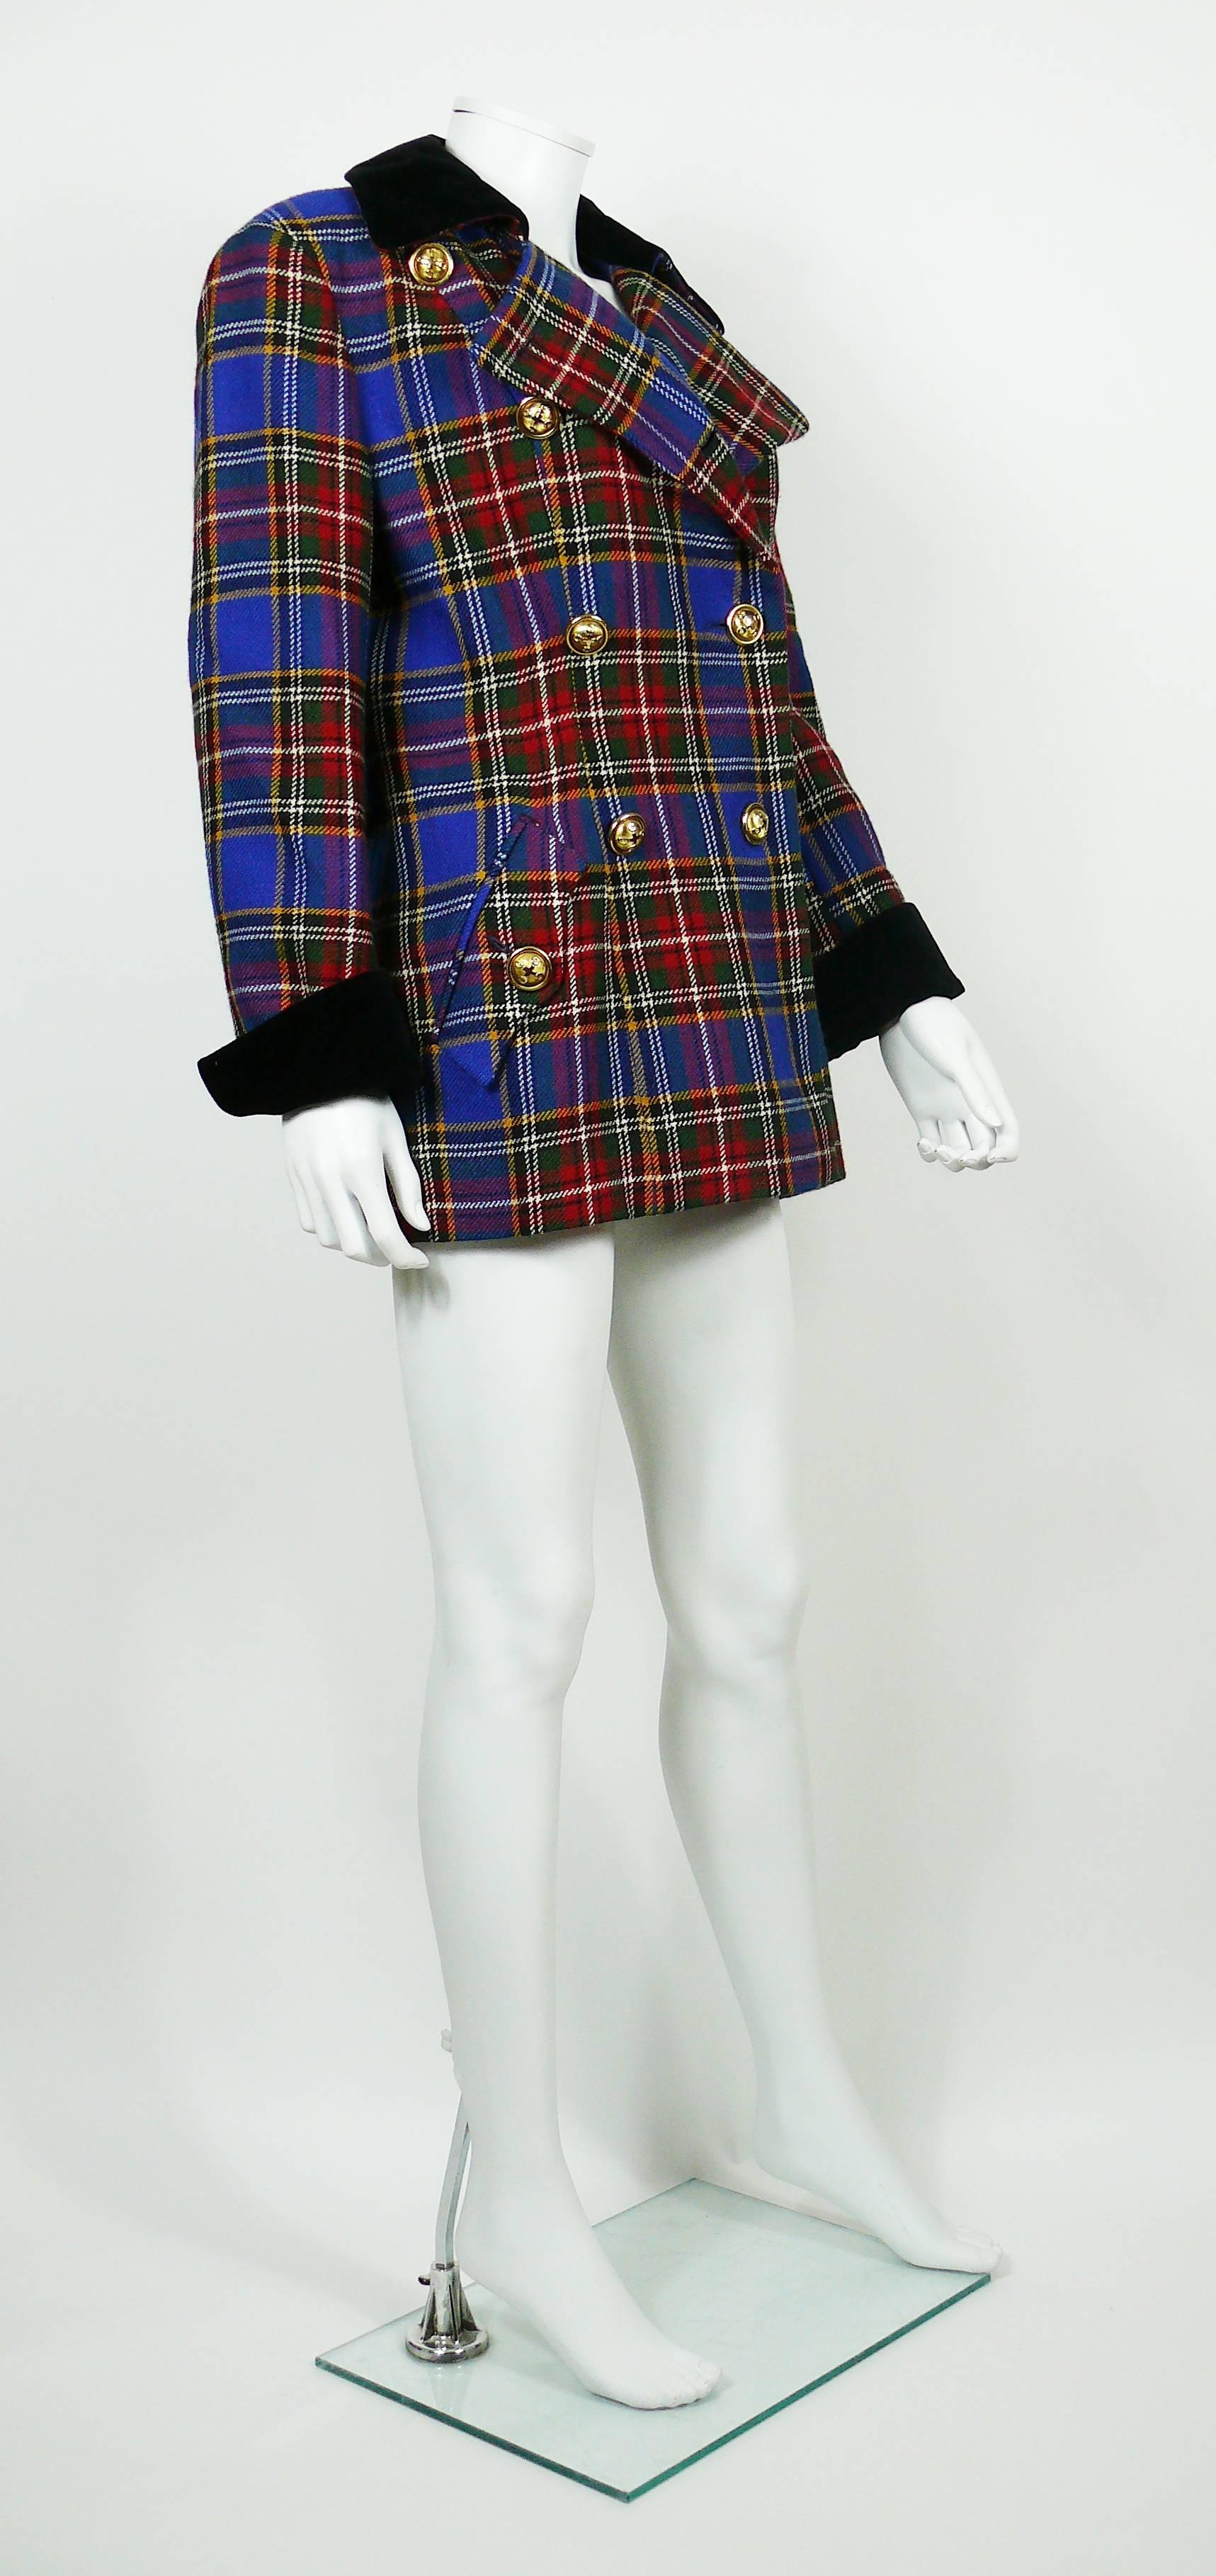 Moschino Vintage Iconic Wool Tartan Plaid Jacket   In Excellent Condition For Sale In Nice, FR